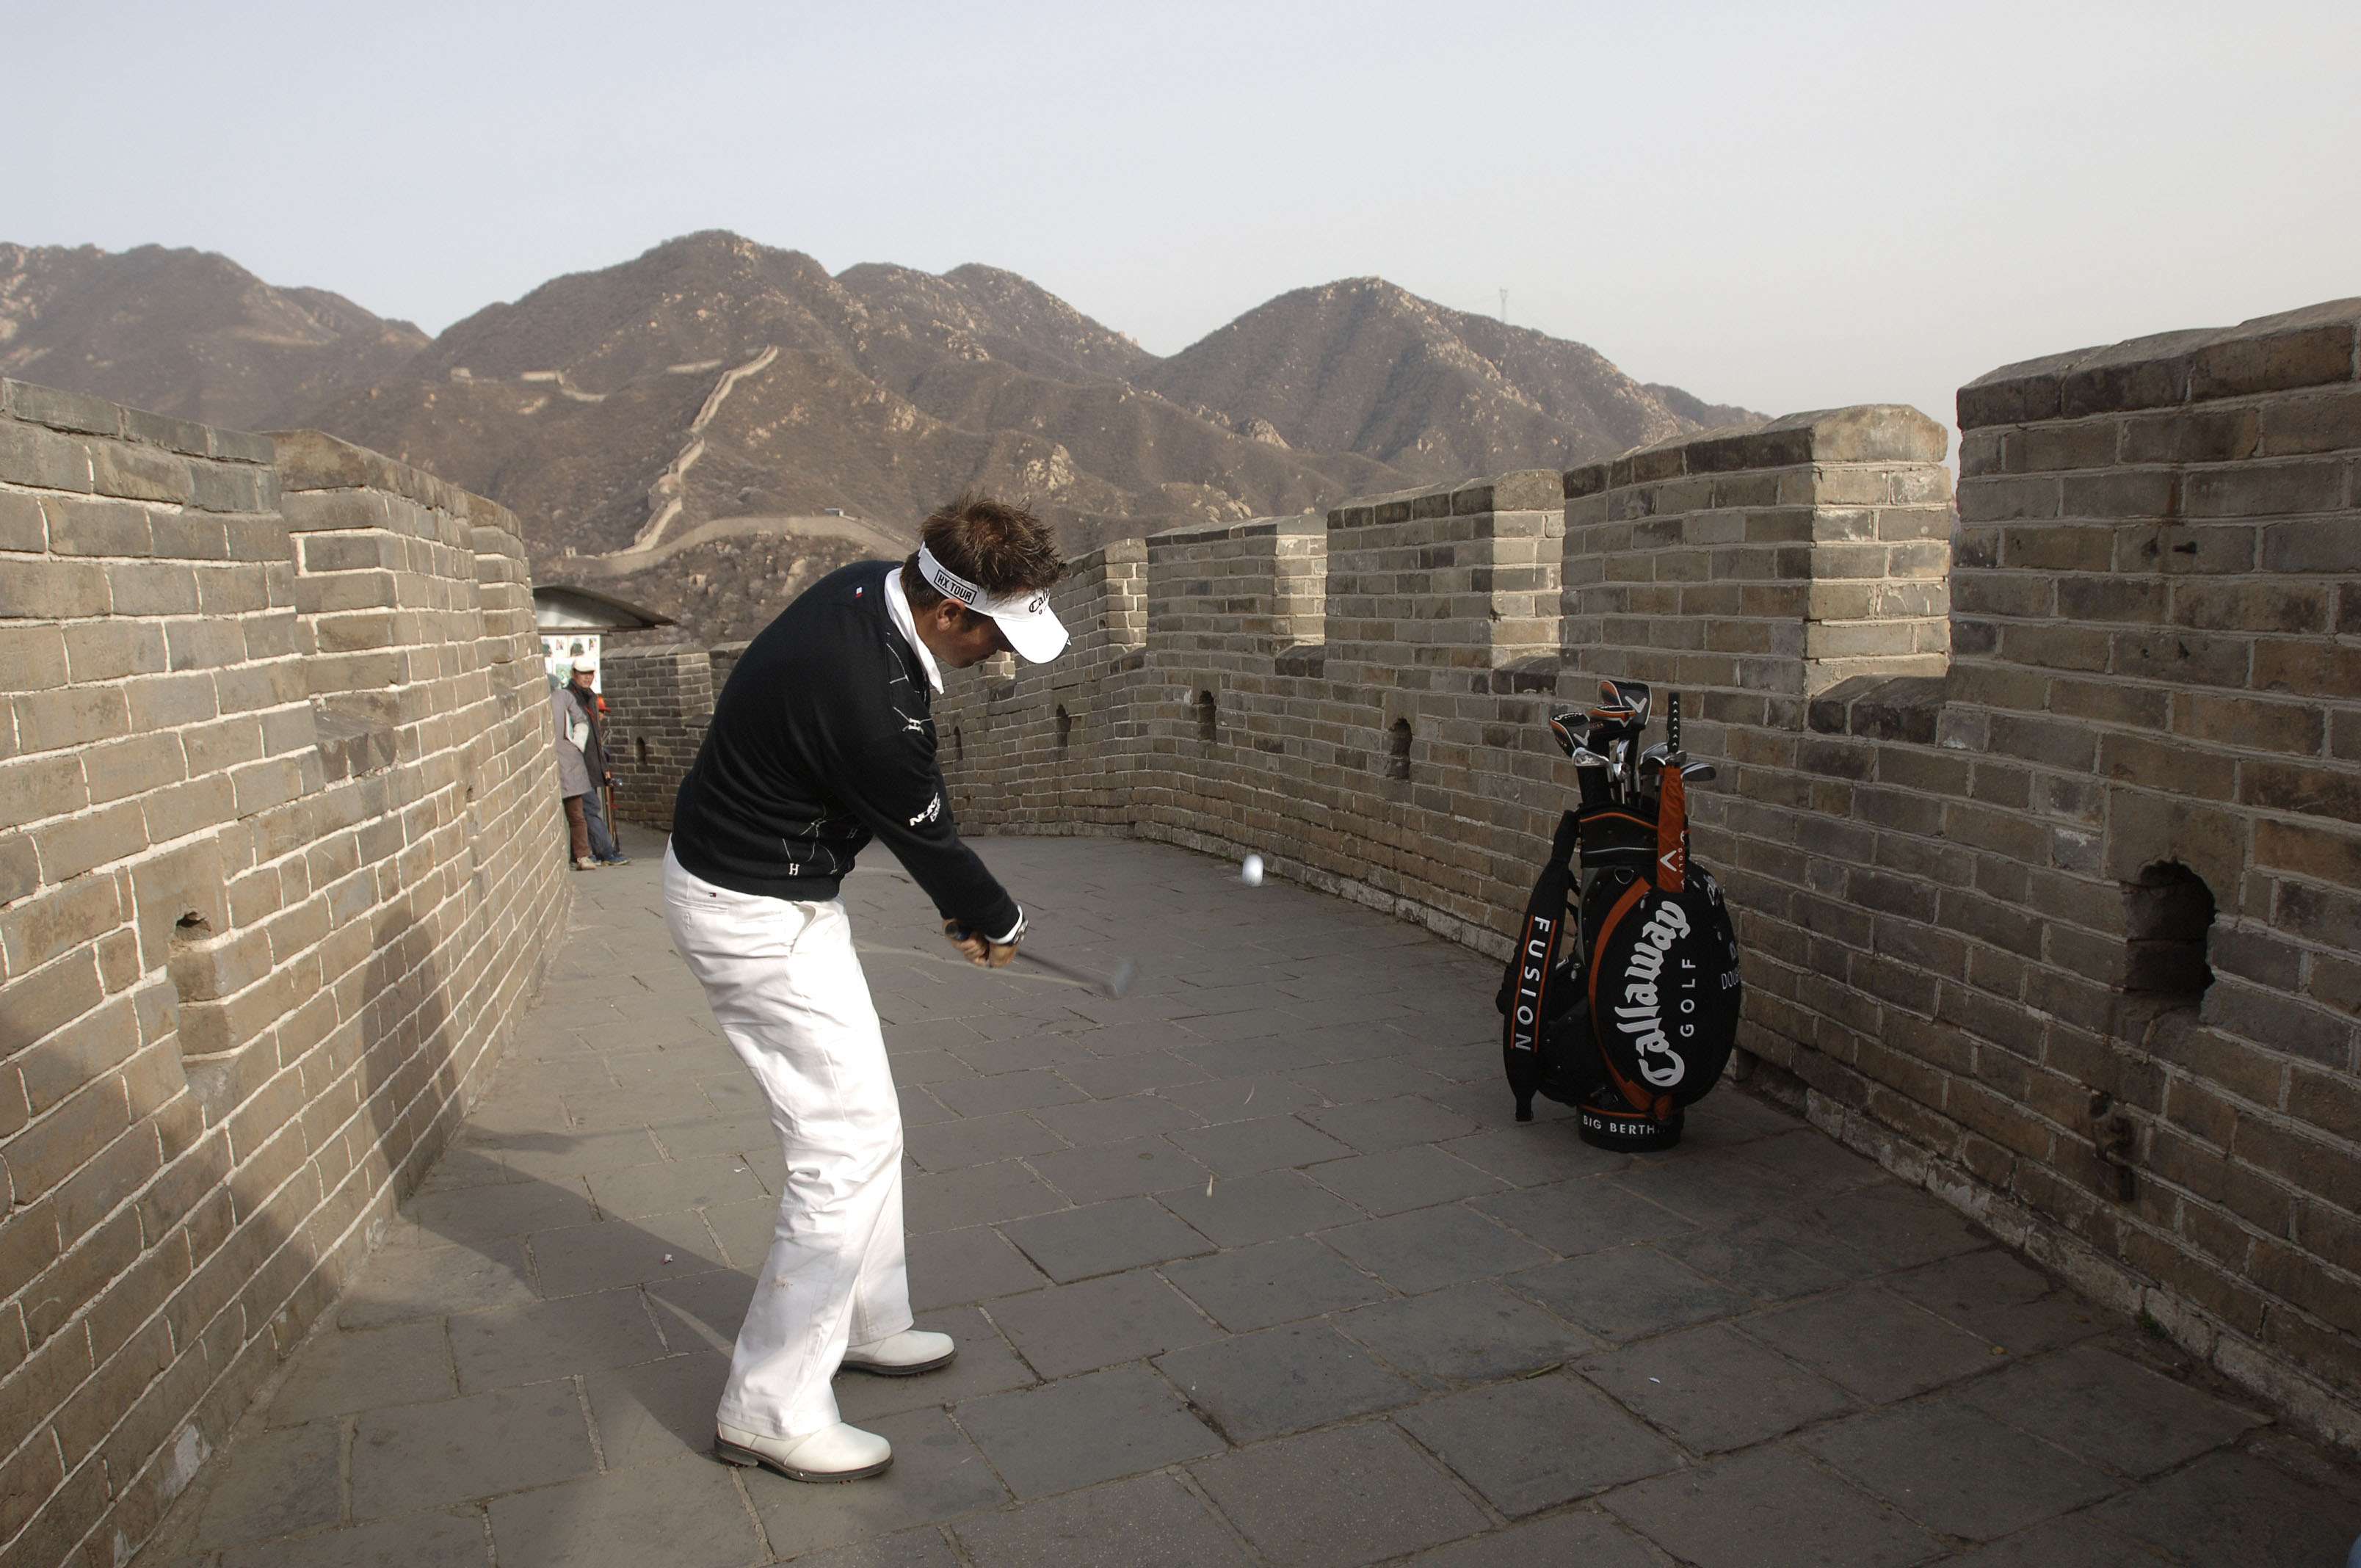 Promotional stunts like this on the Great Wall won’t be happening again any time soon after President Xi Jinping’s crackdown on the game in China. Photo: Richard Castka.